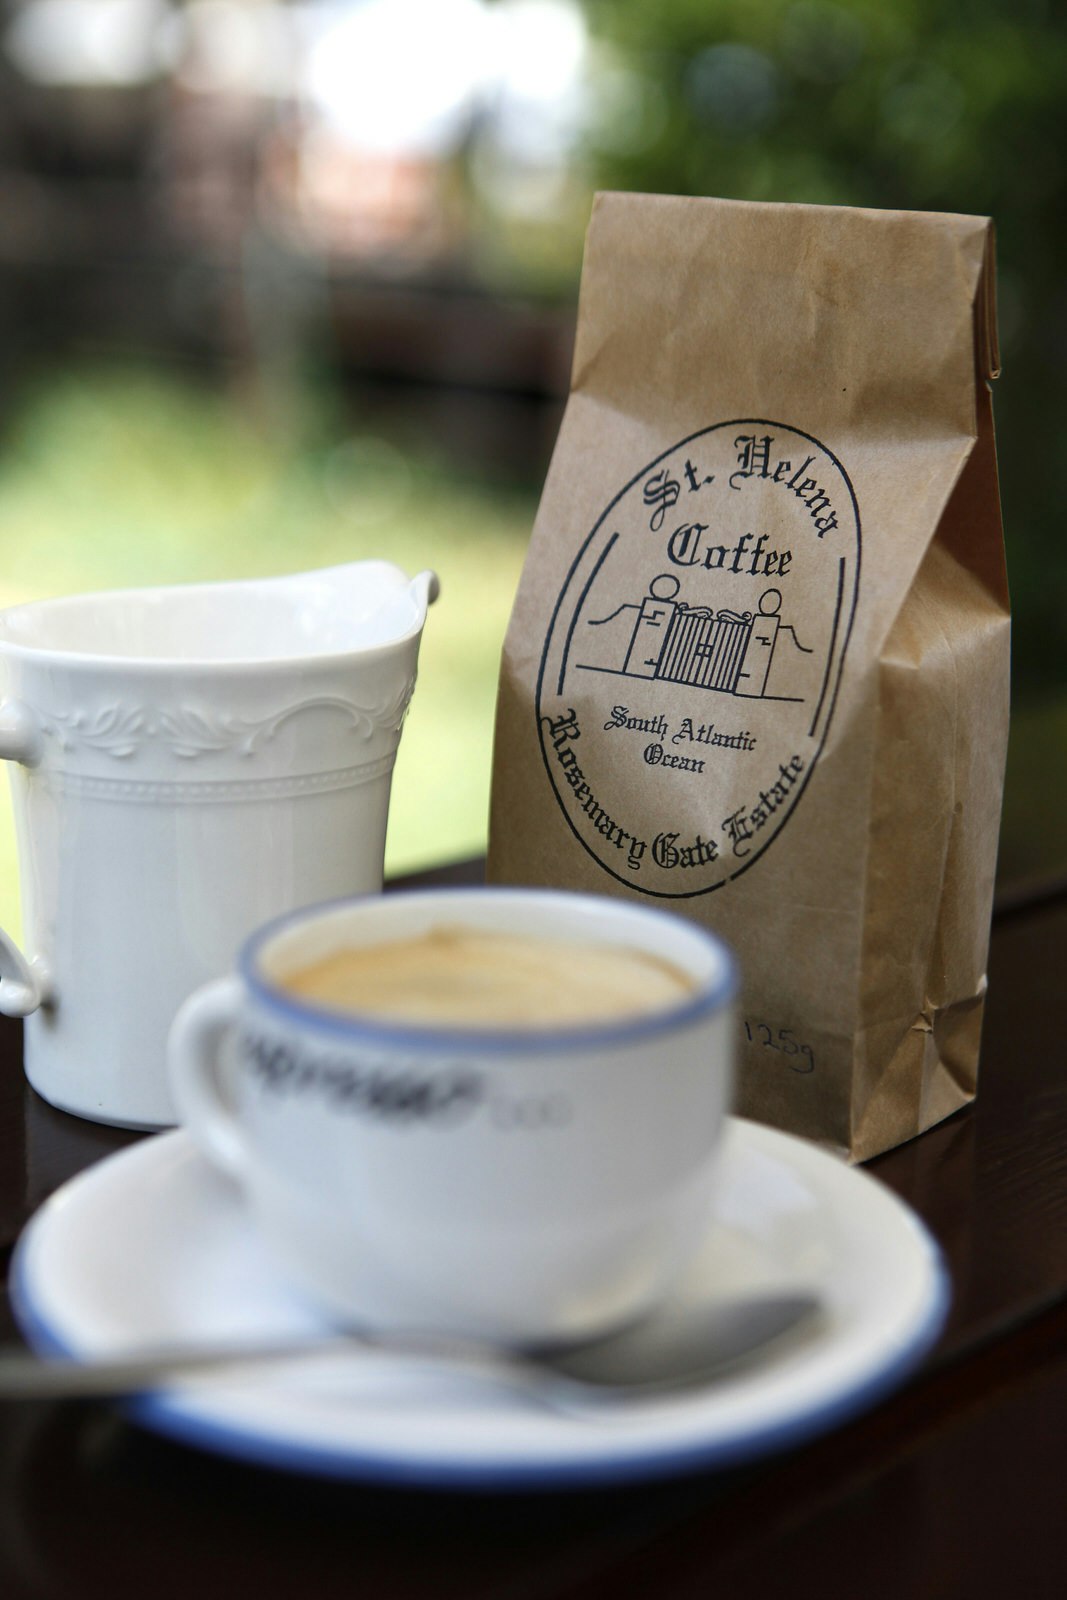 A blurred white cup with a blue rim - full of coffee - sits on a white saucer with spoon next to a white china cream jug; behind the pair (in focus) is a brown paper bag with a logo reading St Helena Coffee.